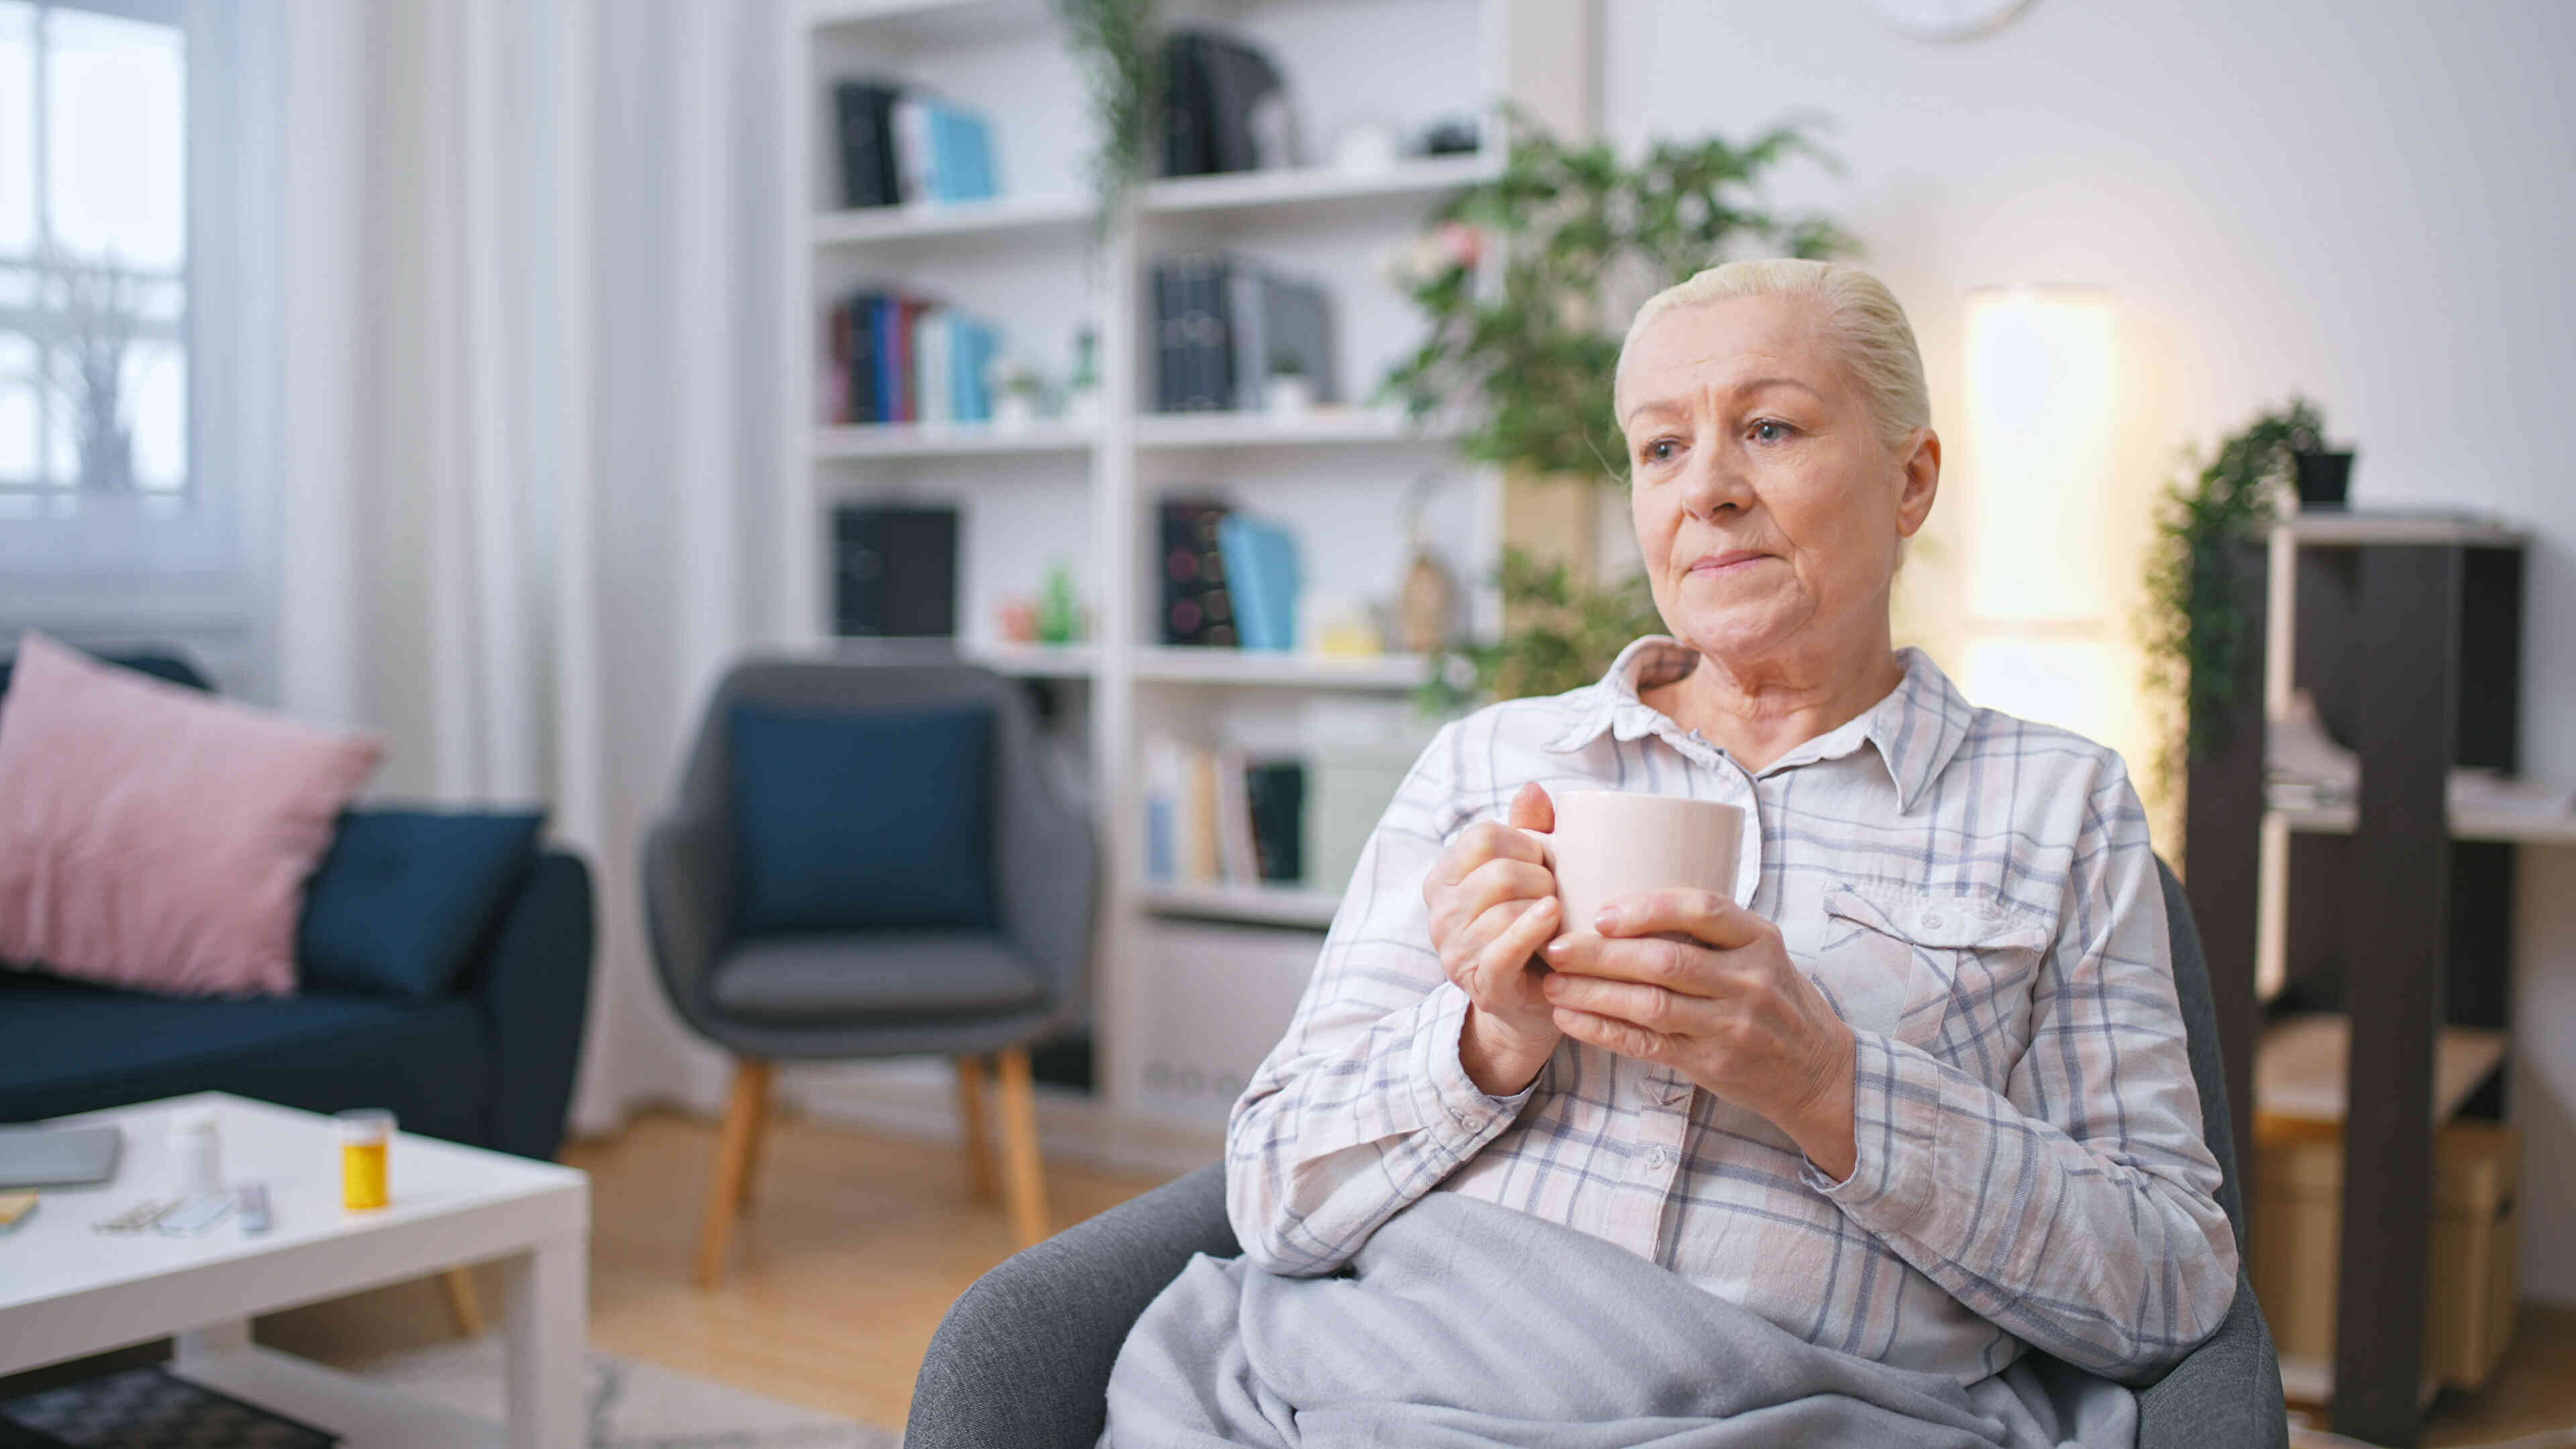 An elderly woman in a plaid shirt sits in a chair in her home and holds a white coffee mug while gazing off sadlt.